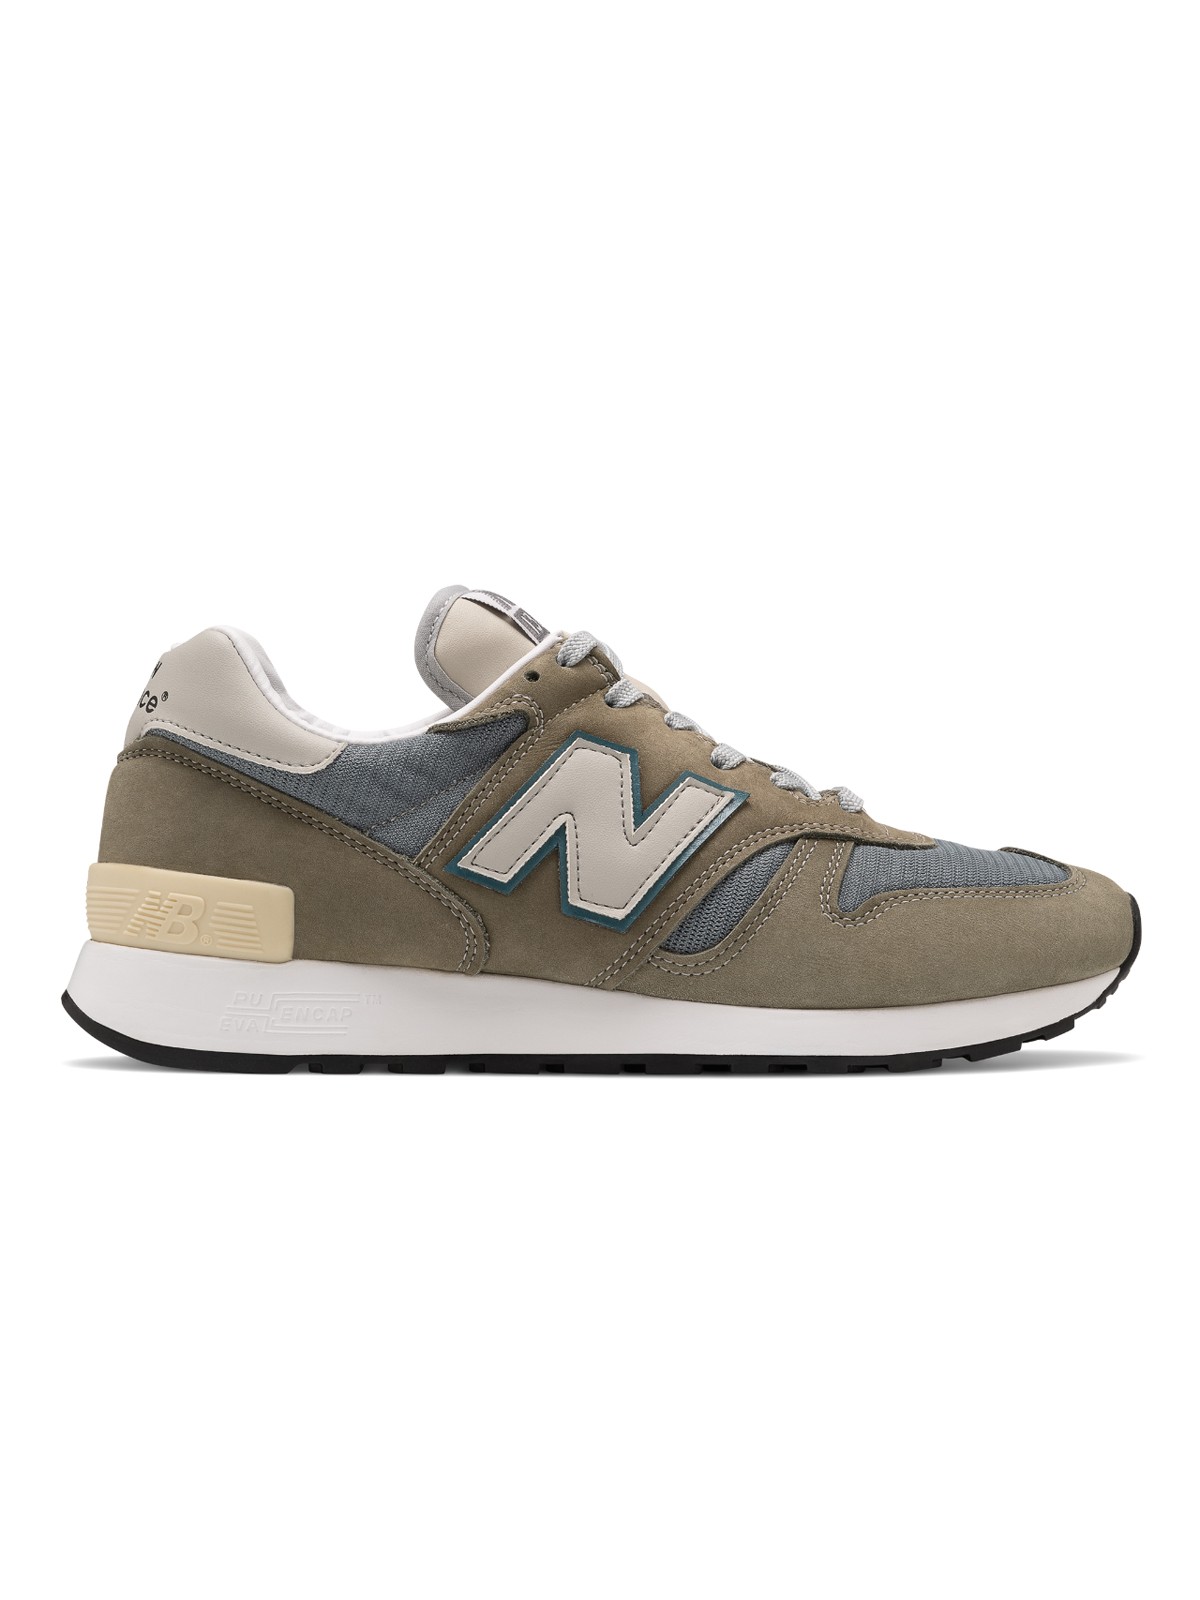 new balance made in japan